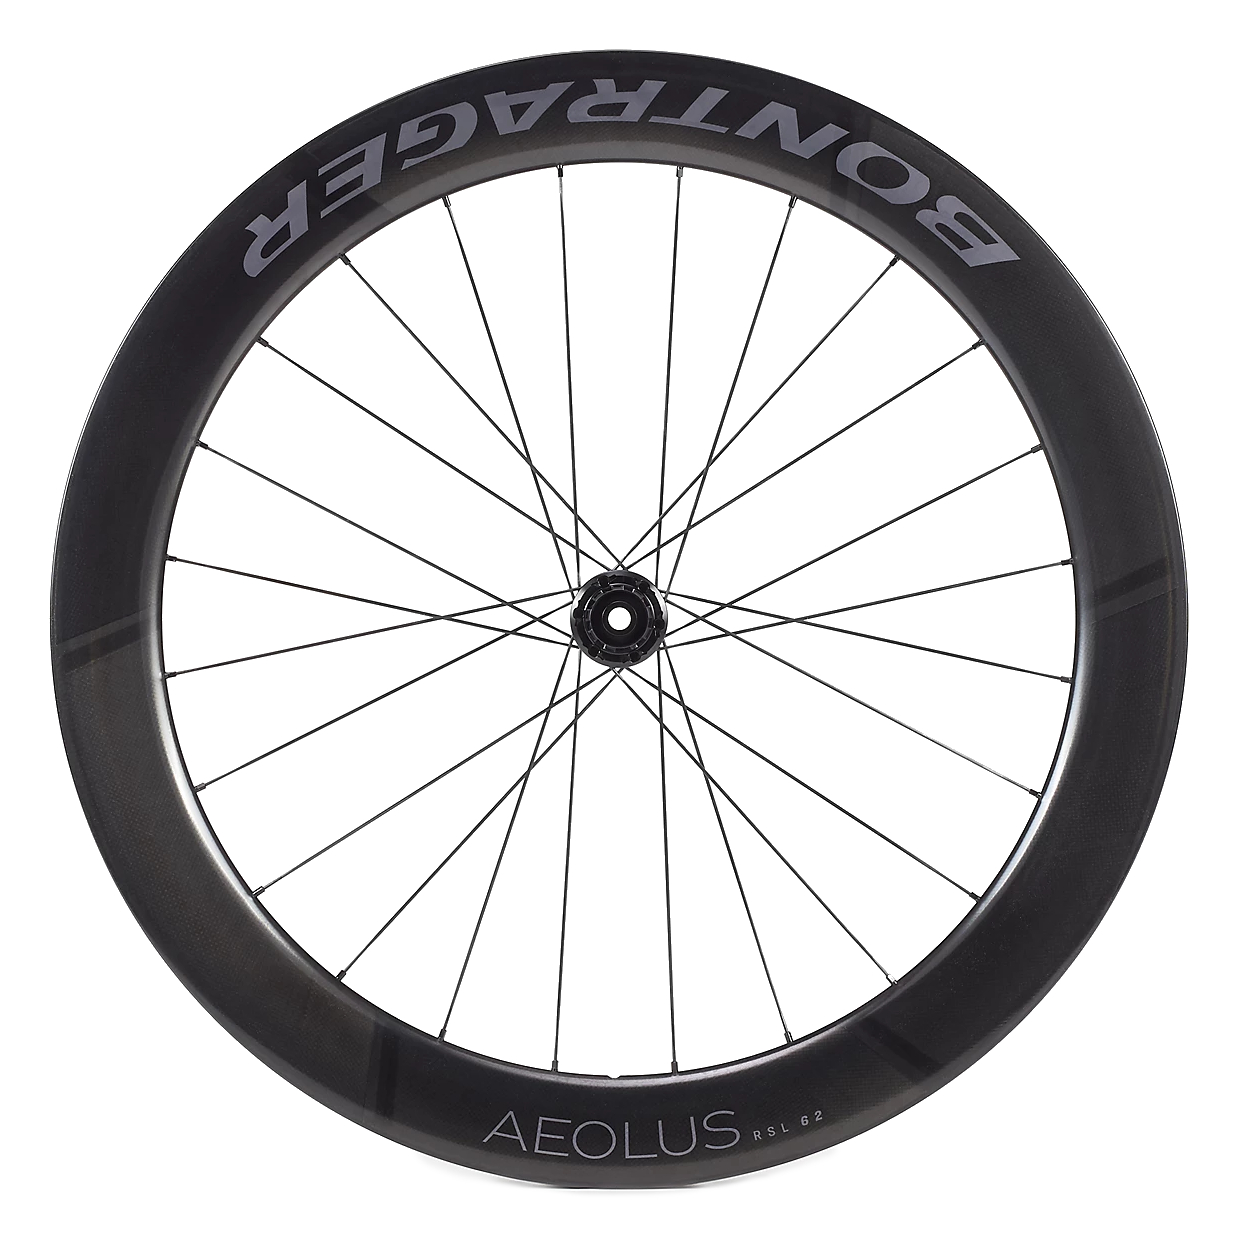 Picture of Bontrager Aeolus RSL 62 TLR Disc Carbon Rear Wheel - Clincher / Tubeless - Centerlock - 12x142mm - Shimano HG